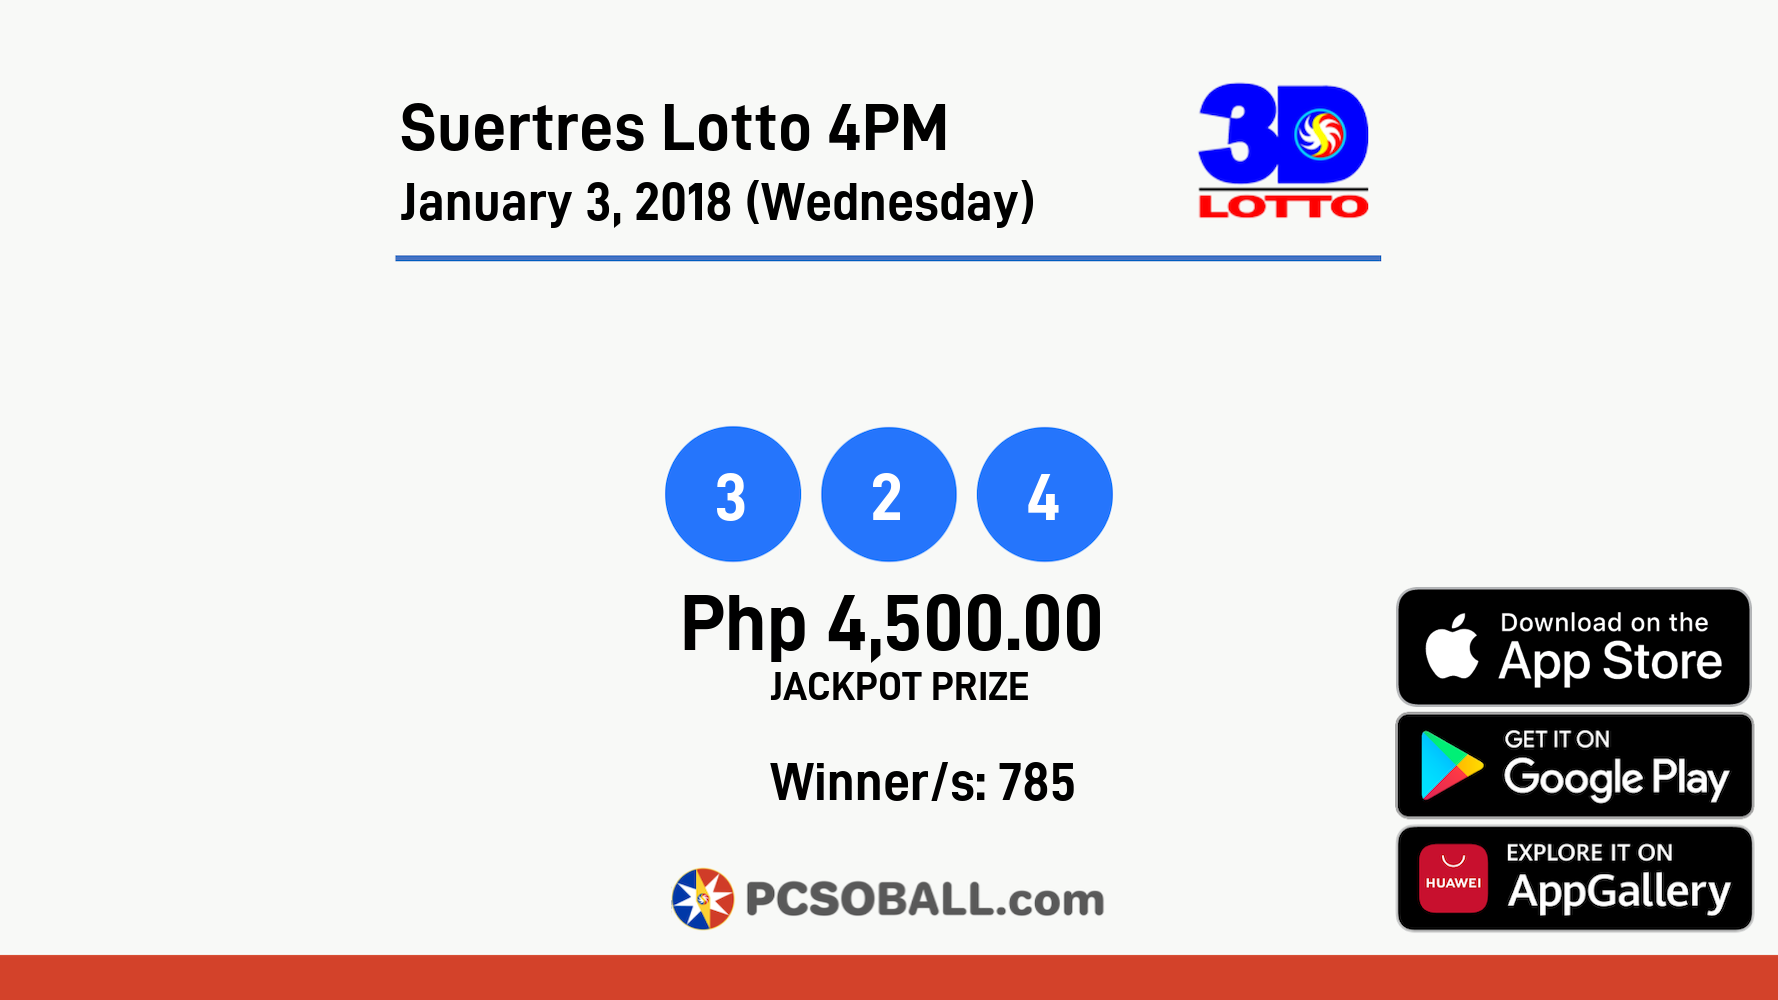 Suertres Lotto 4PM January 3, 2018 (Wednesday) Result